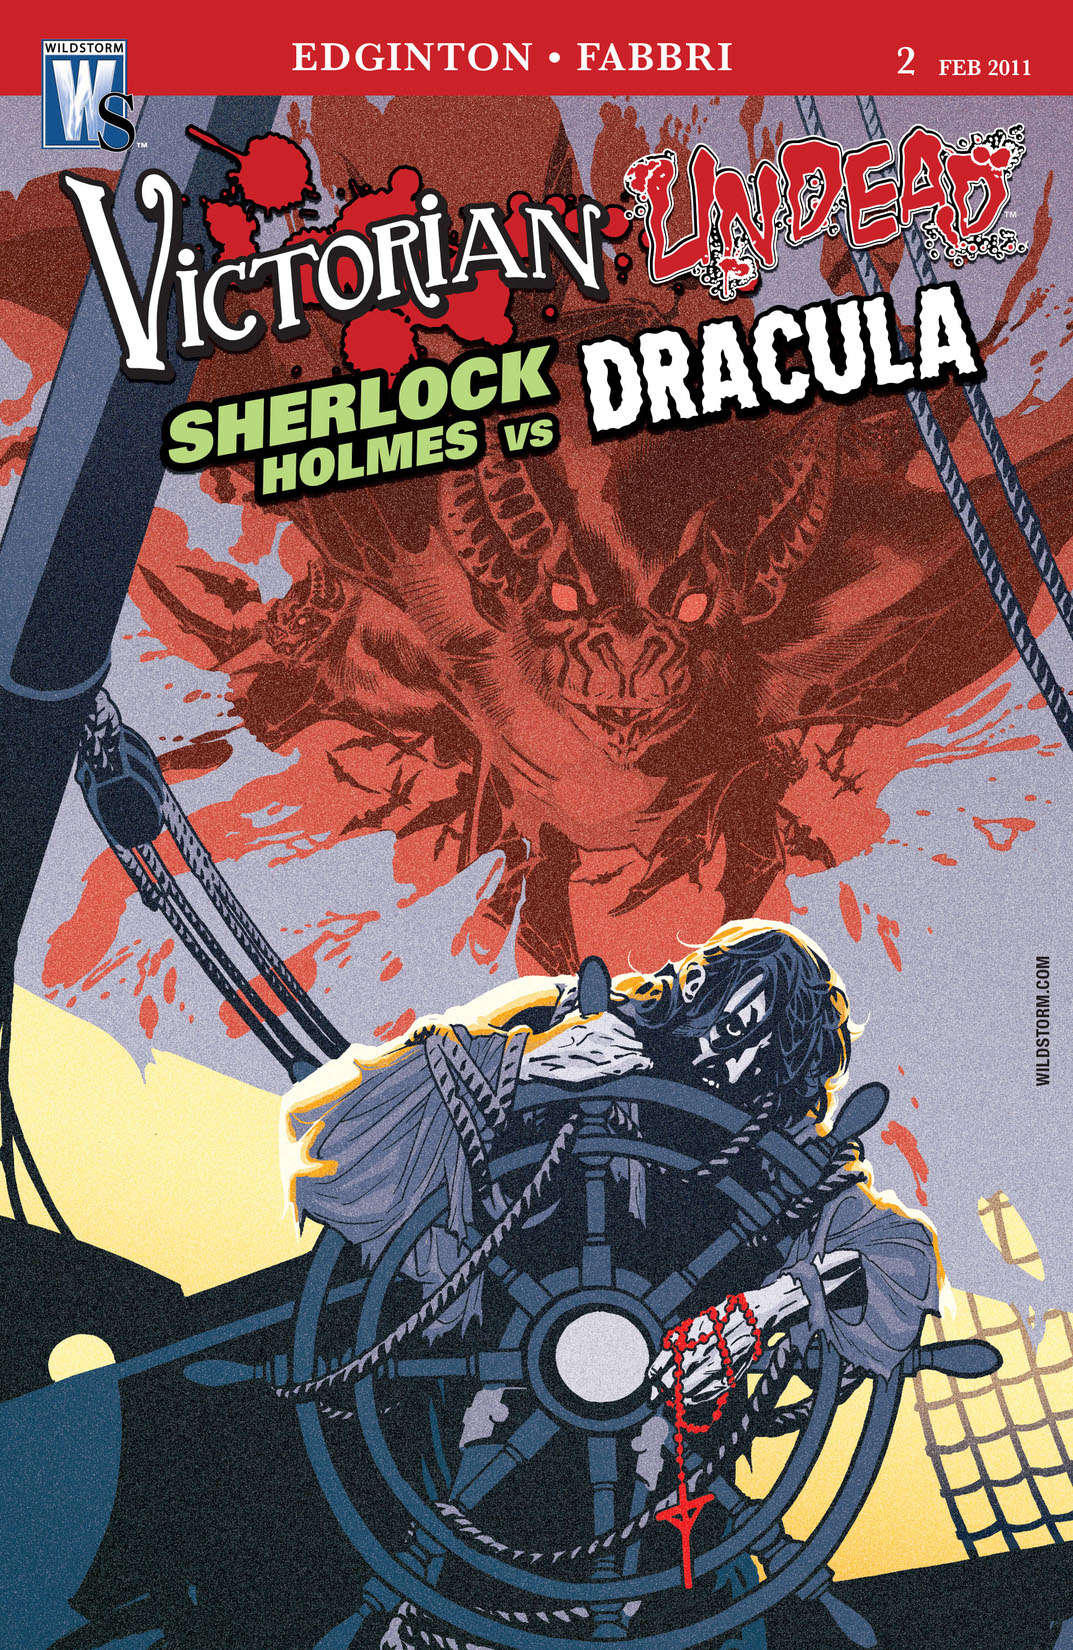 Victorian Undead II: Sherlock Holmes vs. Dracula #2 preview images